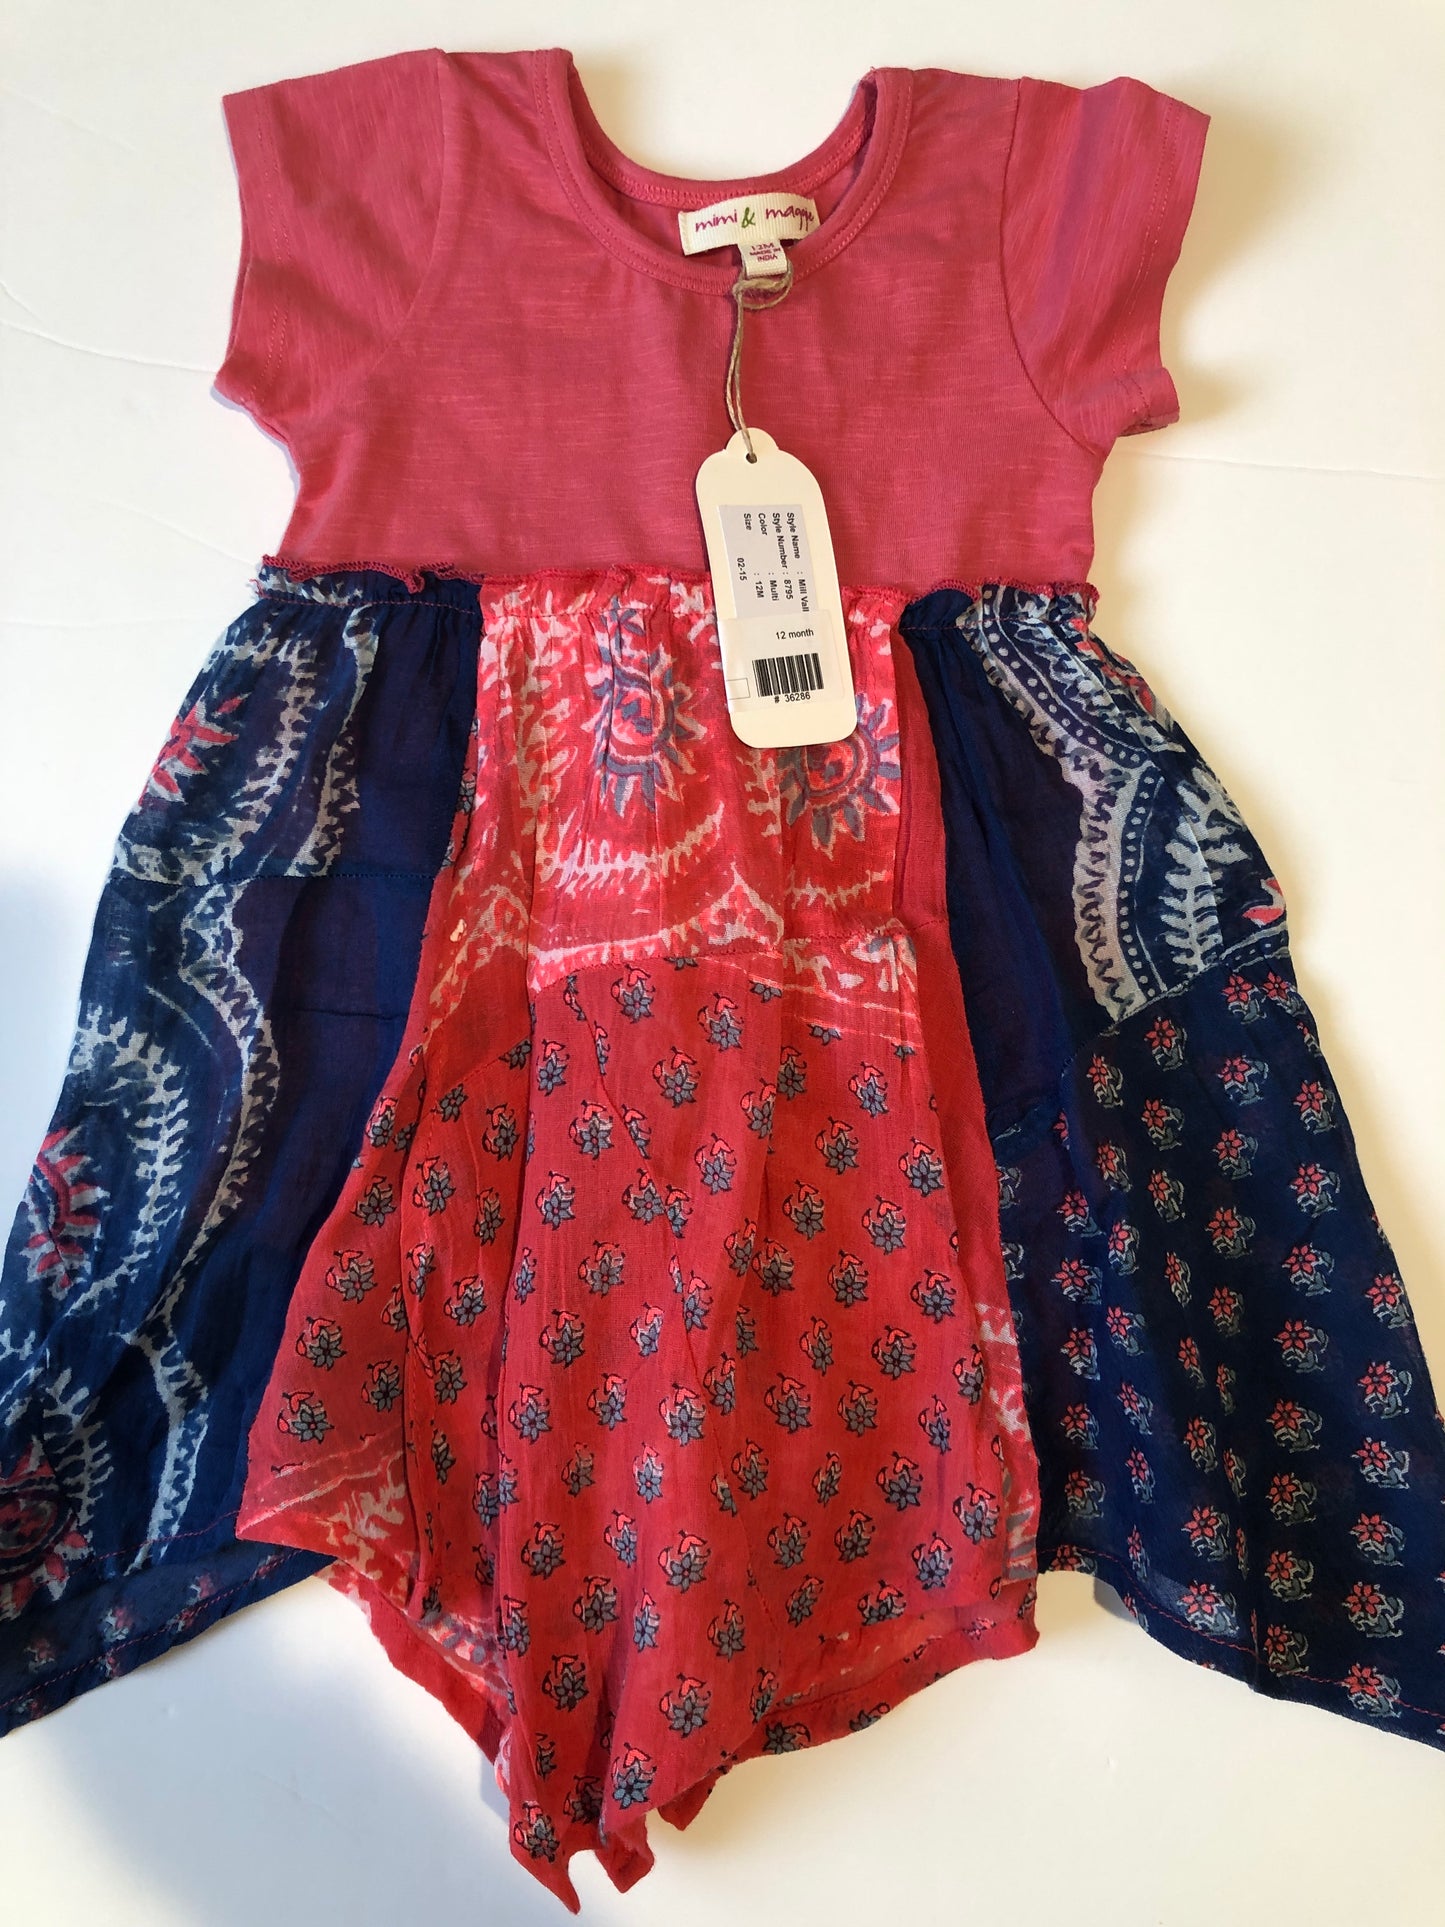 12 month girl dress new. From boutique